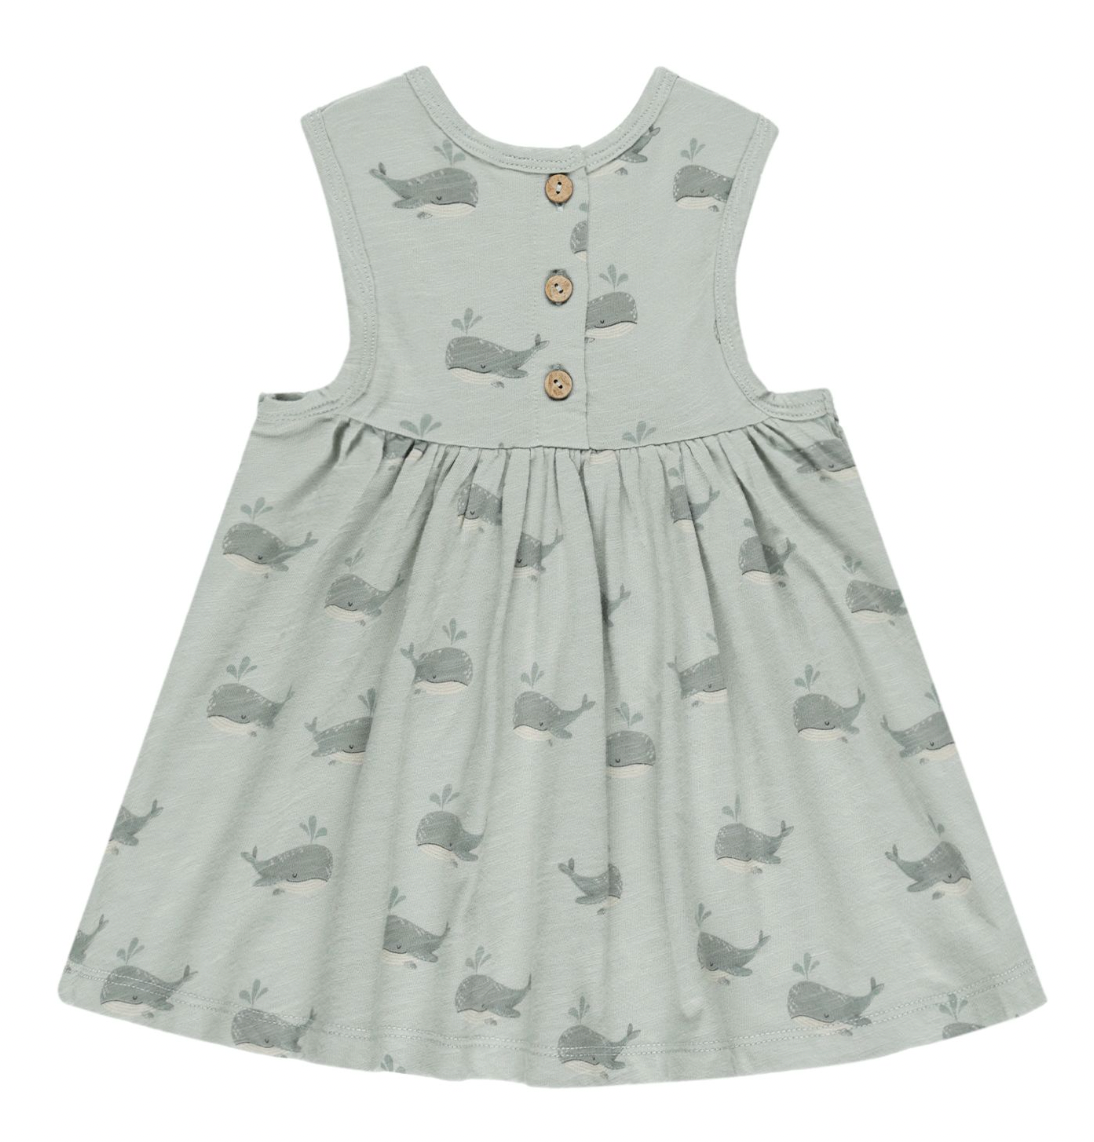 Layla Dress in Whales